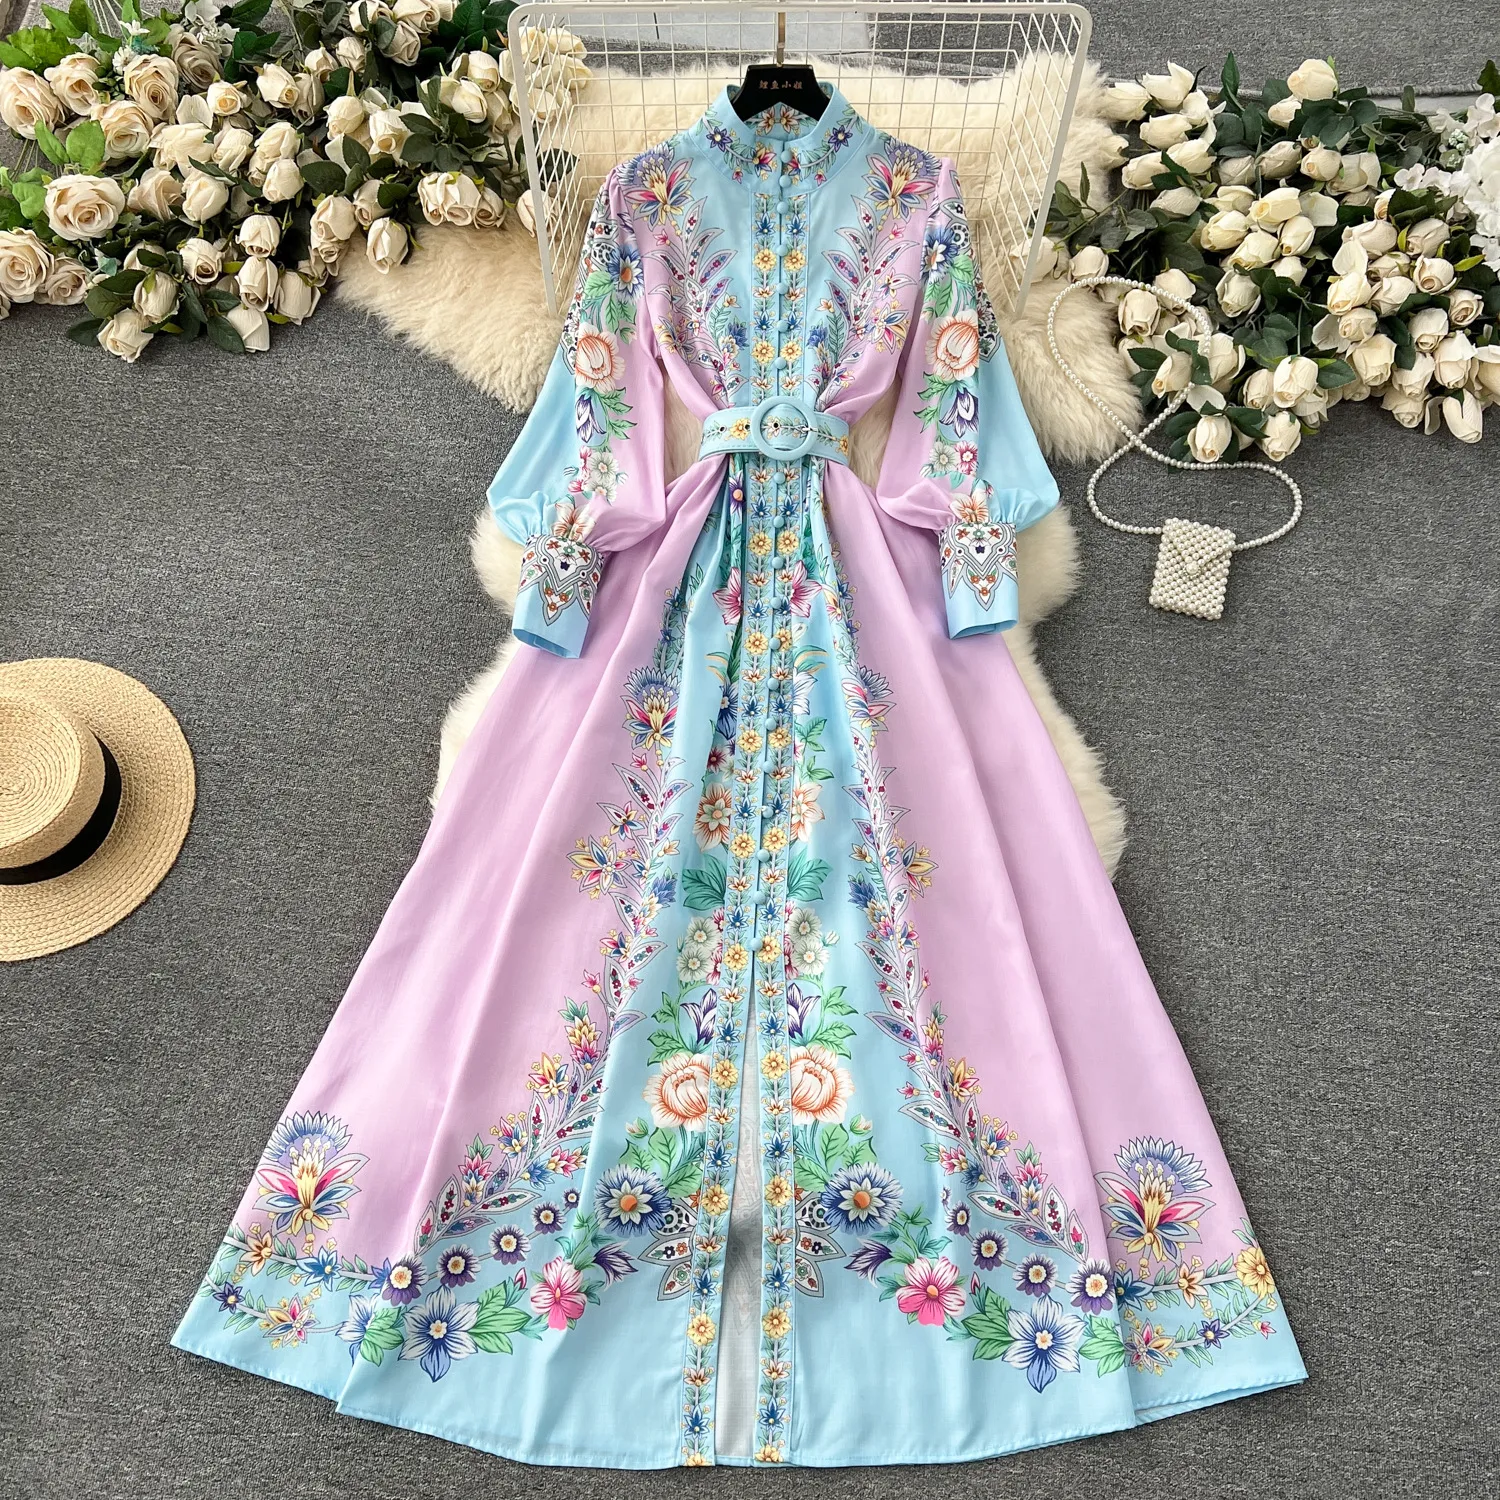 European style palace style dress, temperament, stand up collar, button up, slim fit, long design, printed bubble sleeve dress, spring dress